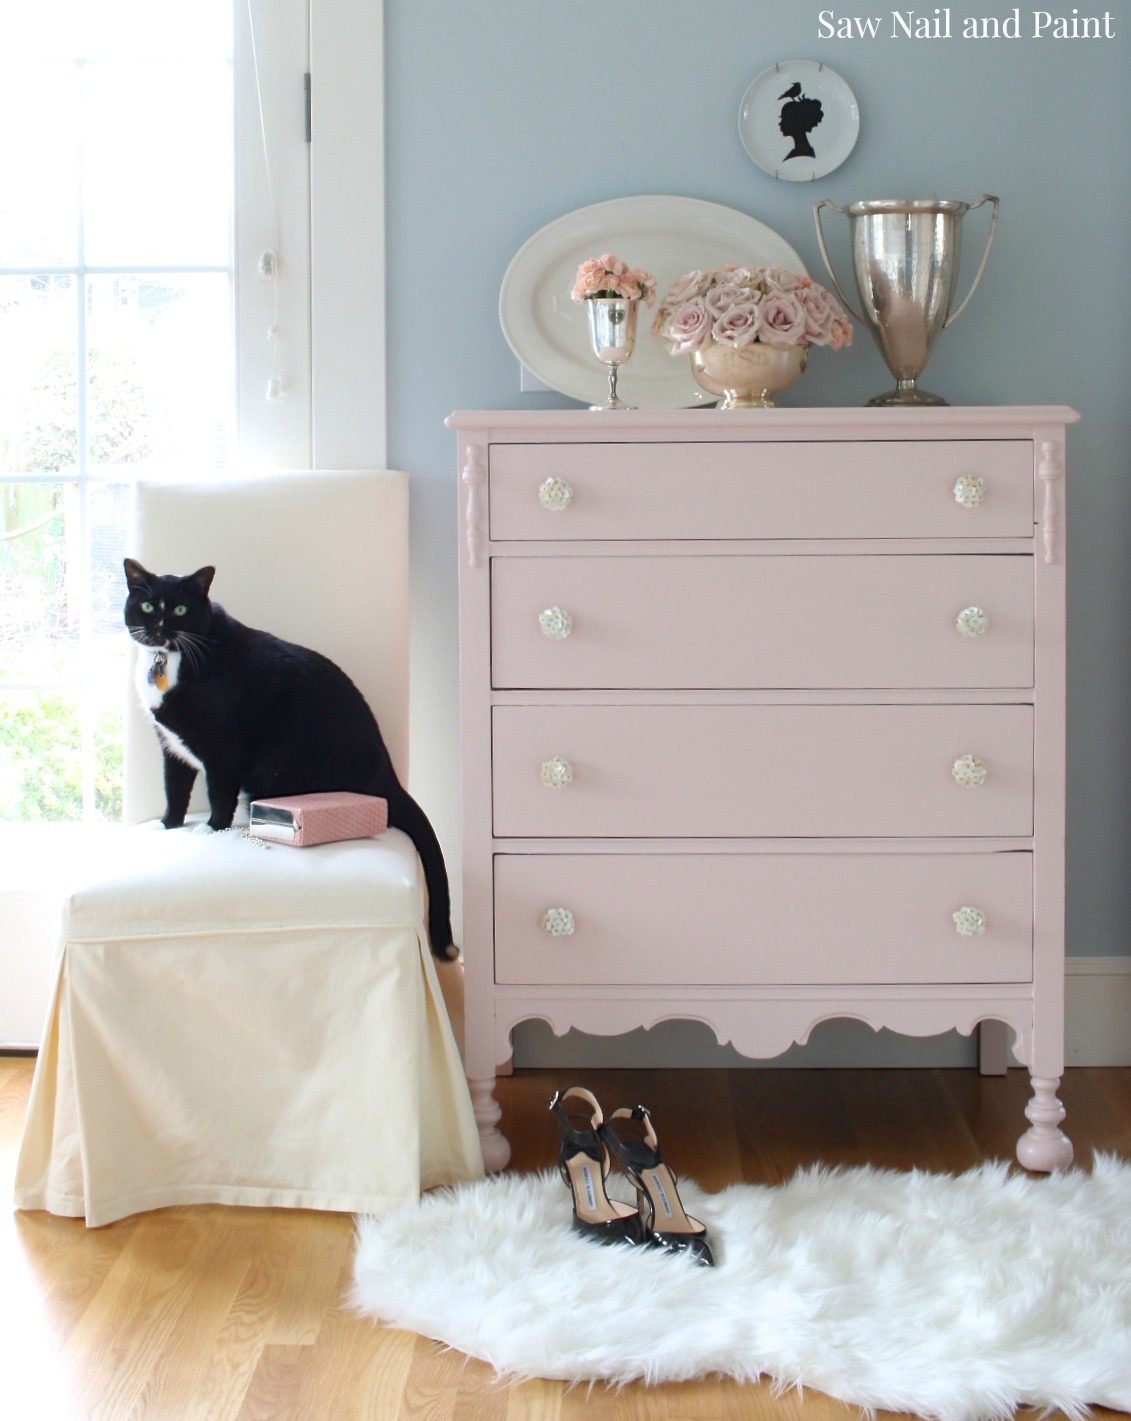 Blush Pink Vintage Dresser Saw Nail And Paint